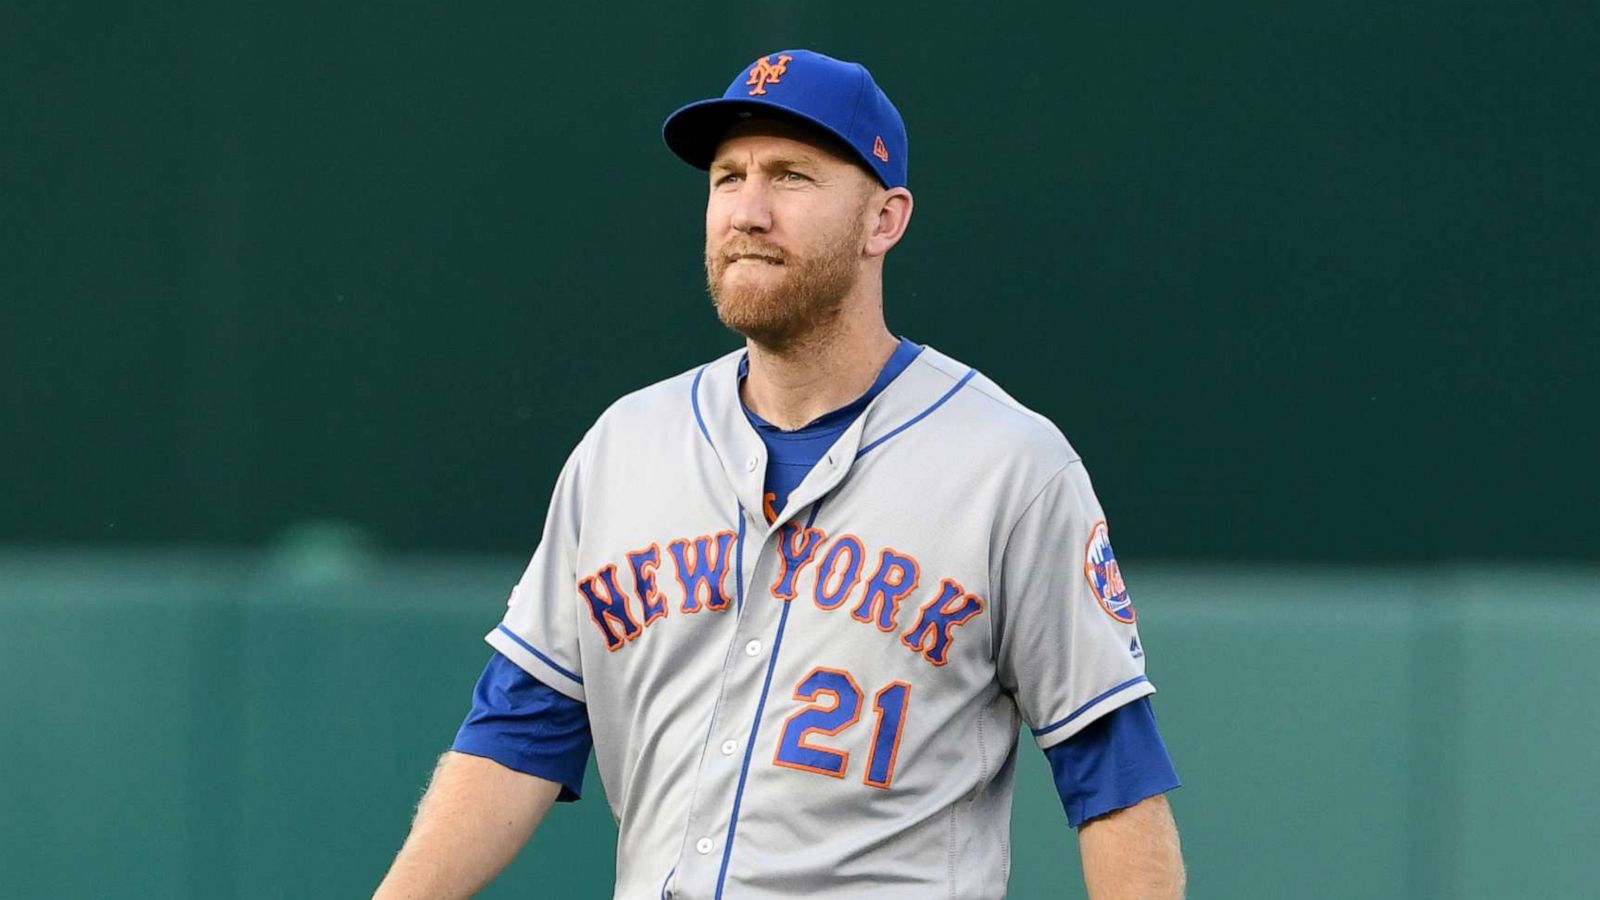 MLB player Todd Frazier calls for action after turkeys terrorize